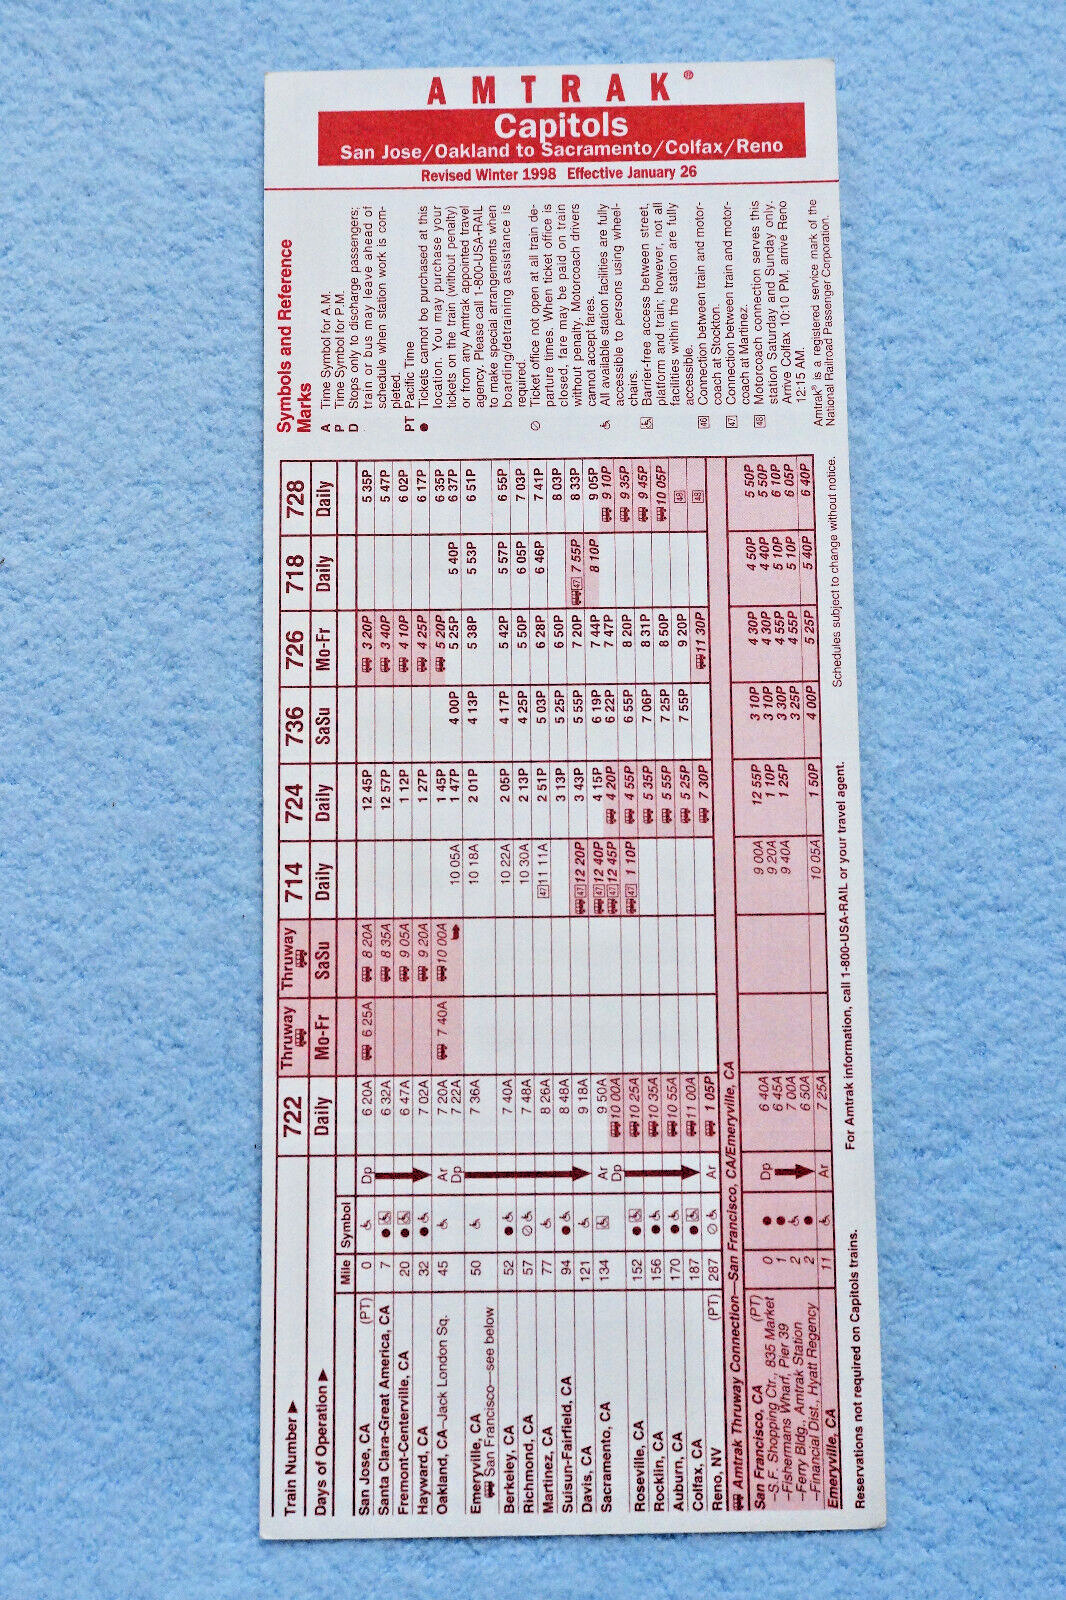 Amtrak Capitols Card - Revised Winter 1998